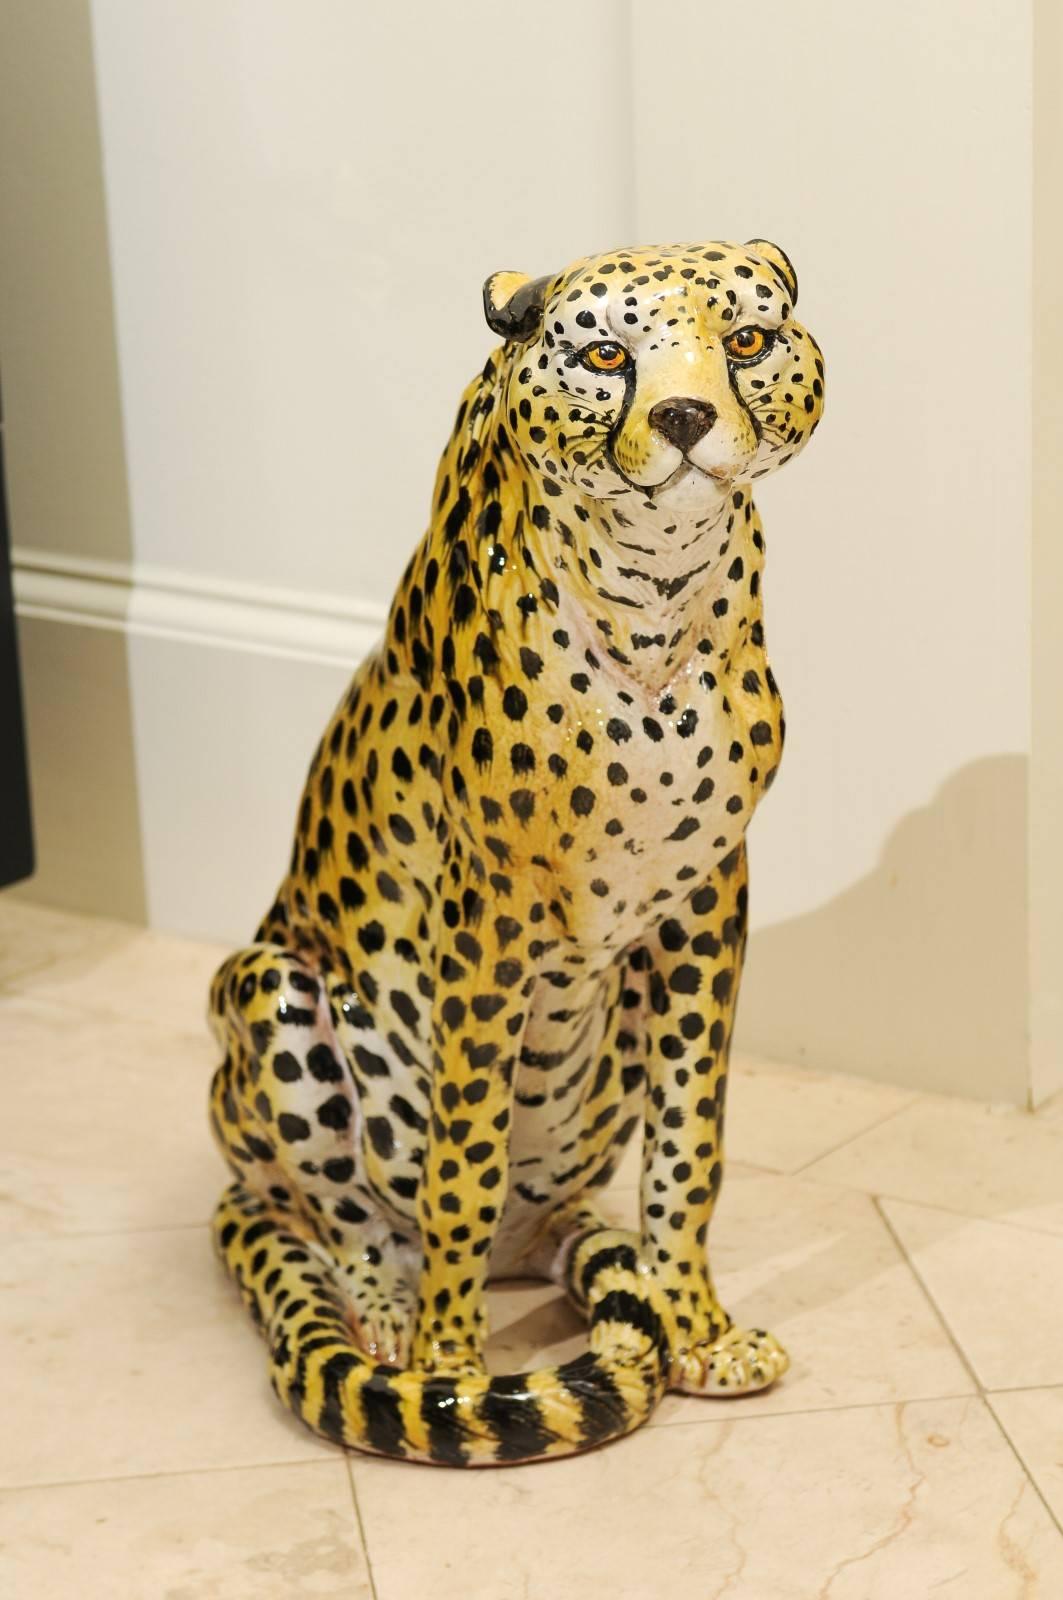 An off-the-chain Italian glazed terracotta Cheetah, circa 1970. Fantastic form and facial expression with a range of color will bring a smile to your face. Exceptional weight, quality and craftsmanship. Exquisite jewelry! Excellent vintage